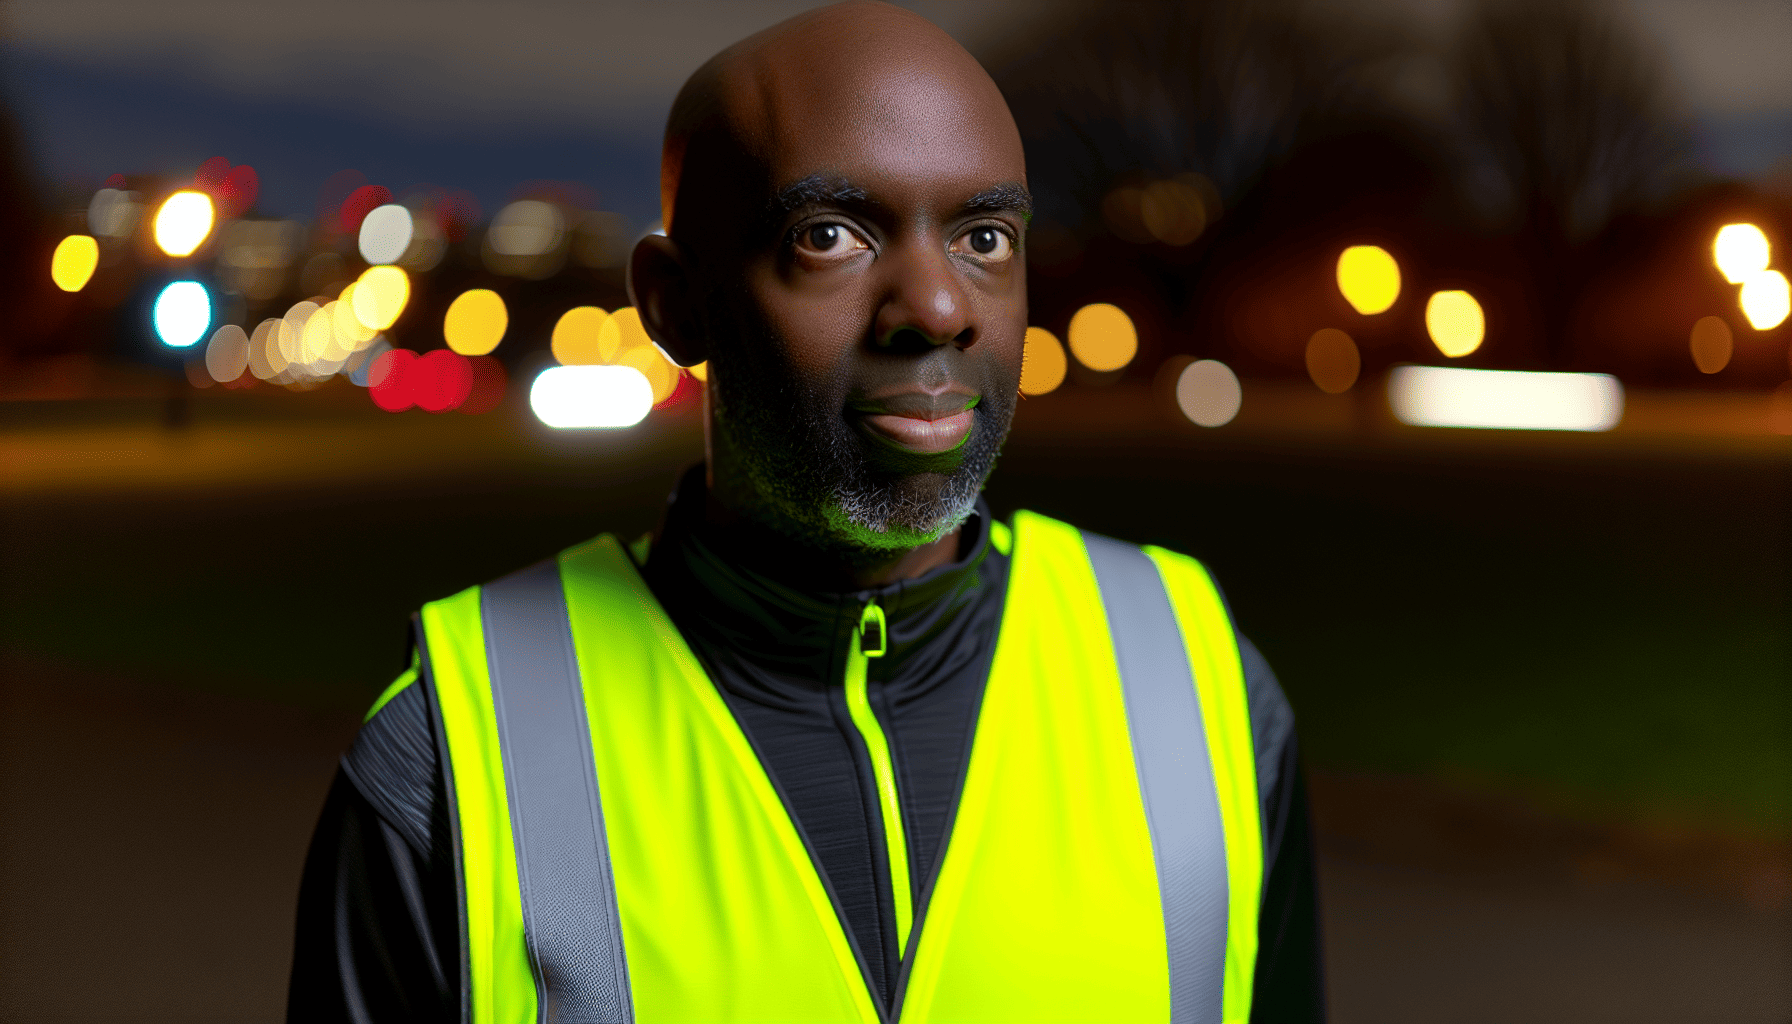 Person wearing reflective vest for nighttime walk